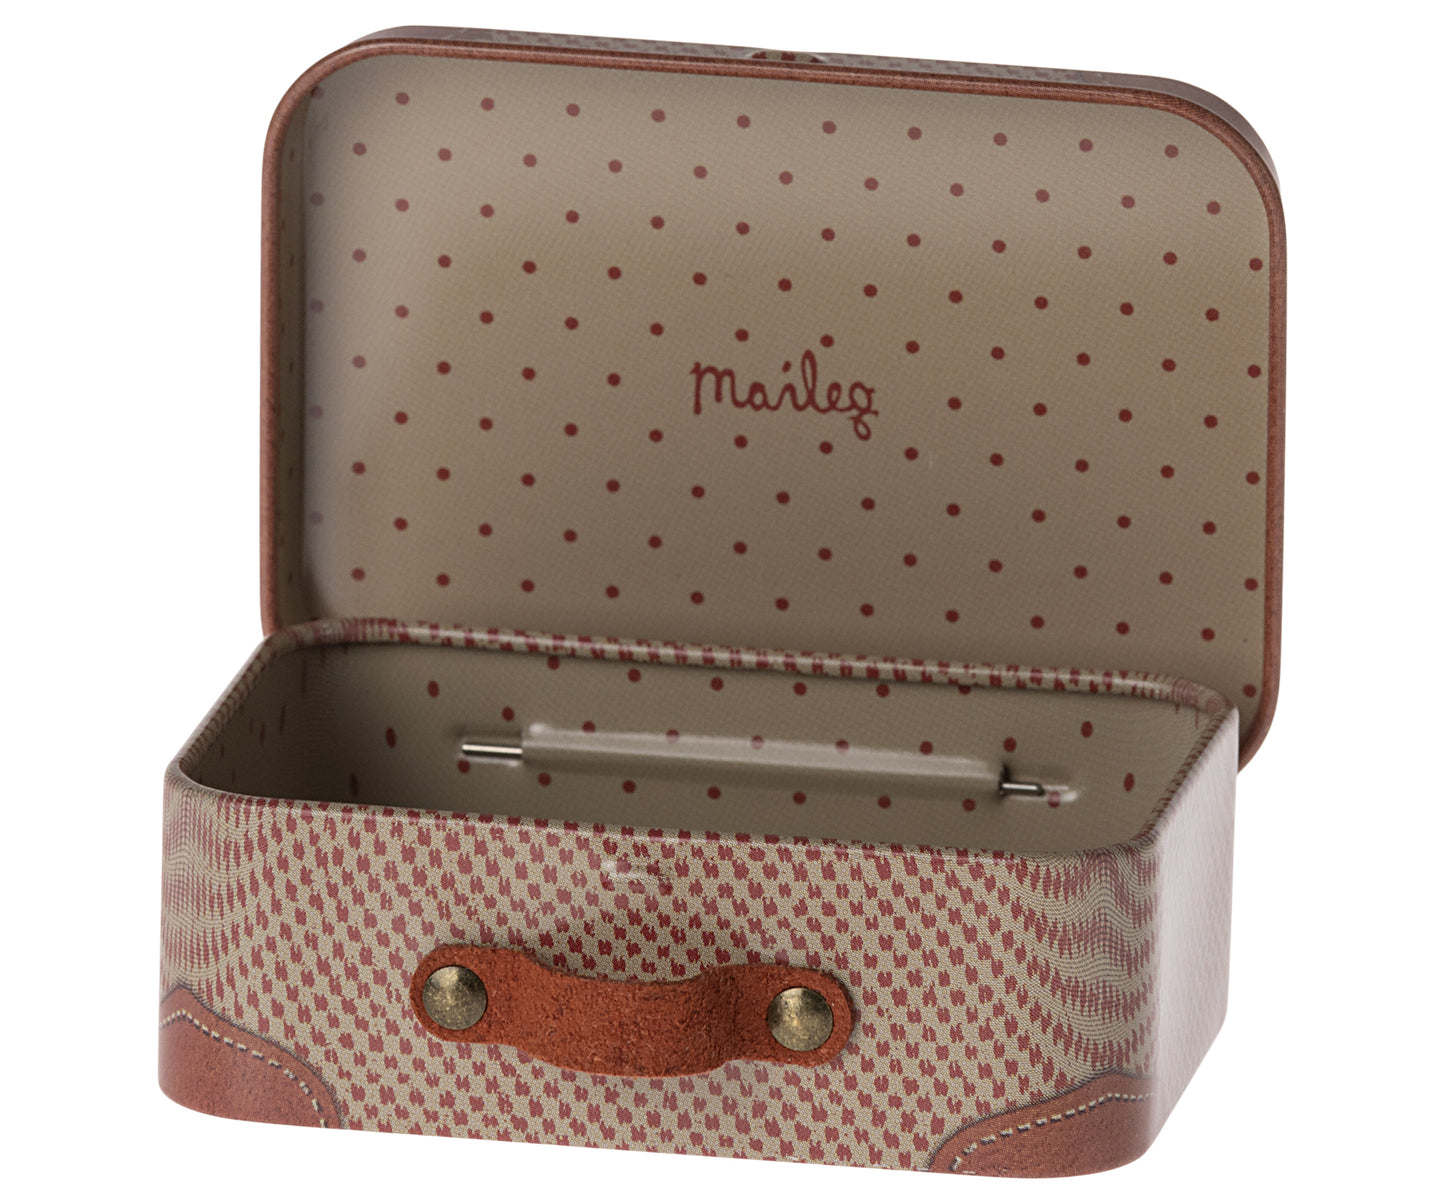 *PRE-ORDER* - Maileg Suitcase, Micro, Rose - *ESTIMATED ARRIVAL EARLY APRIL 2024*